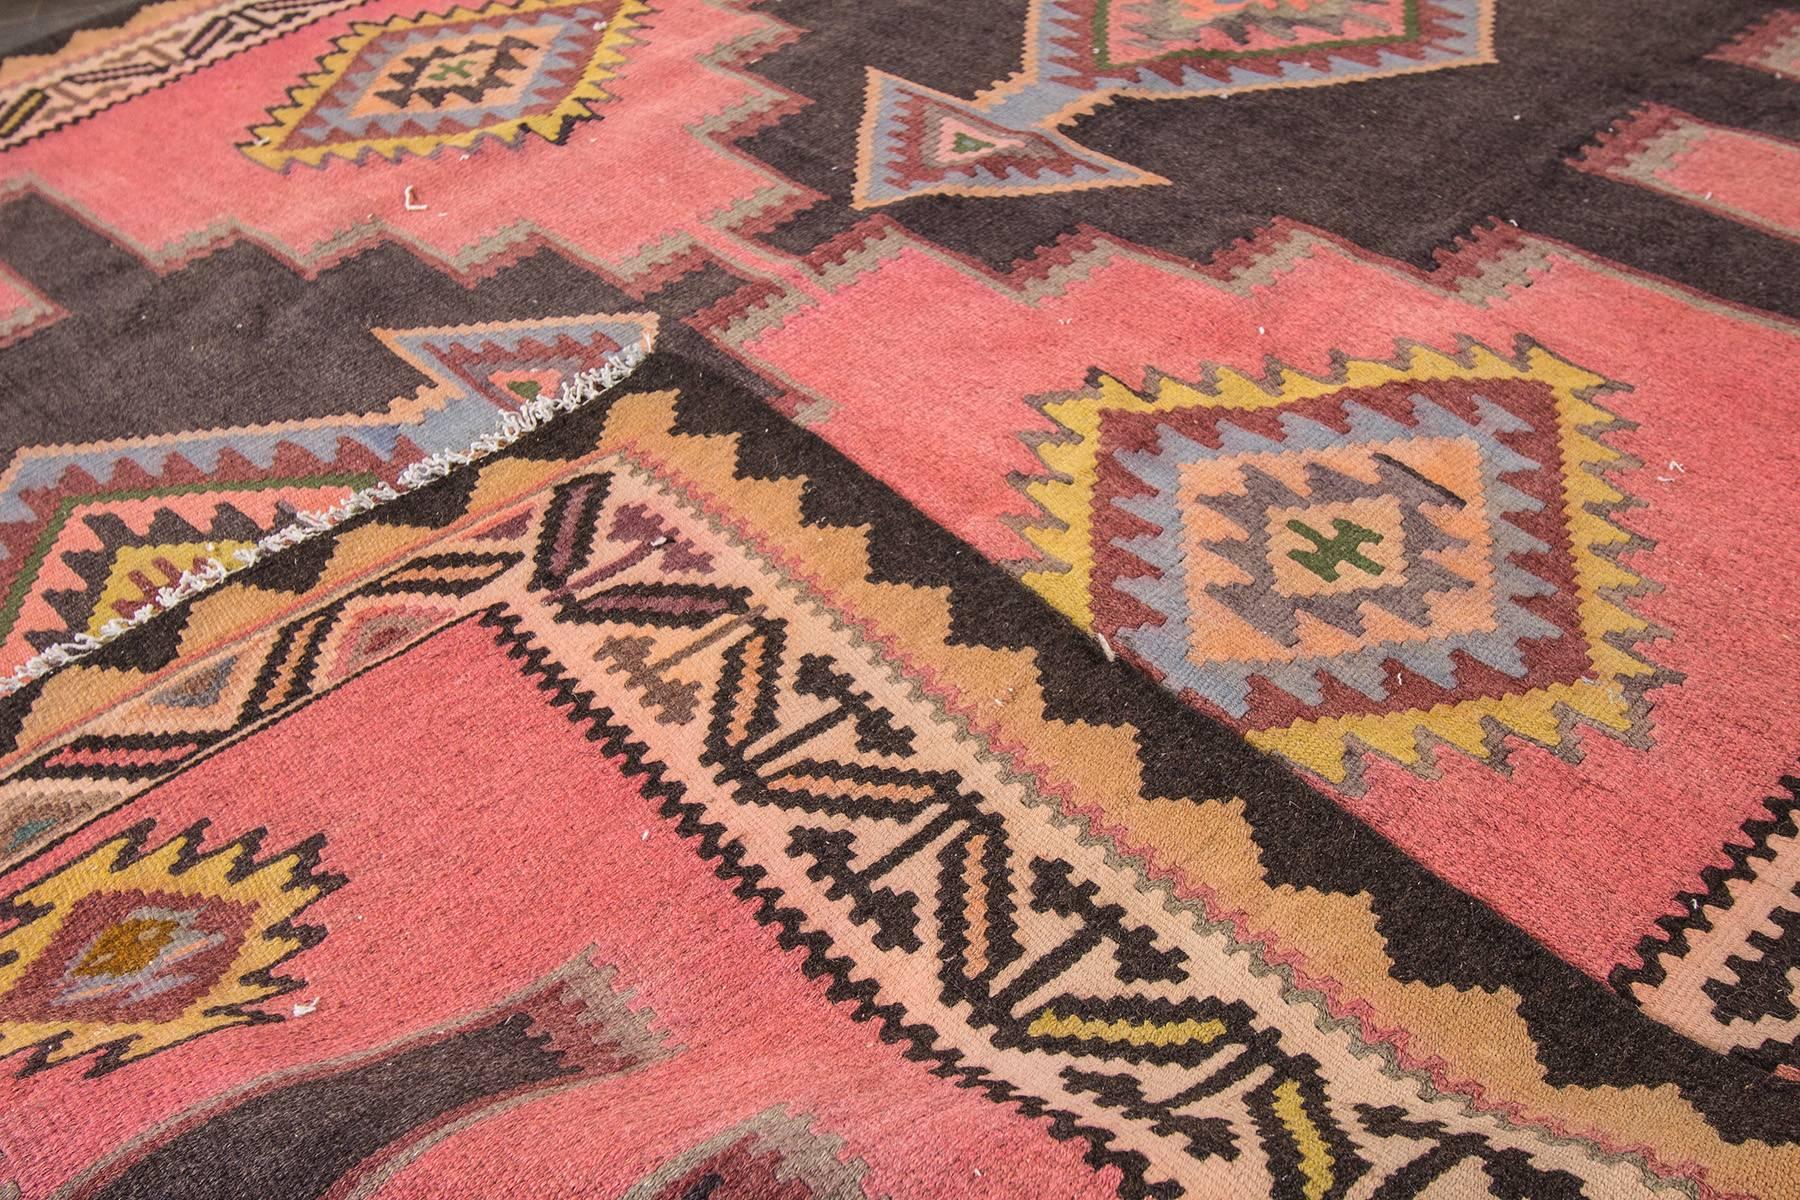 Hand-Woven Gorgeously Contrasted Persian Kilim Rug